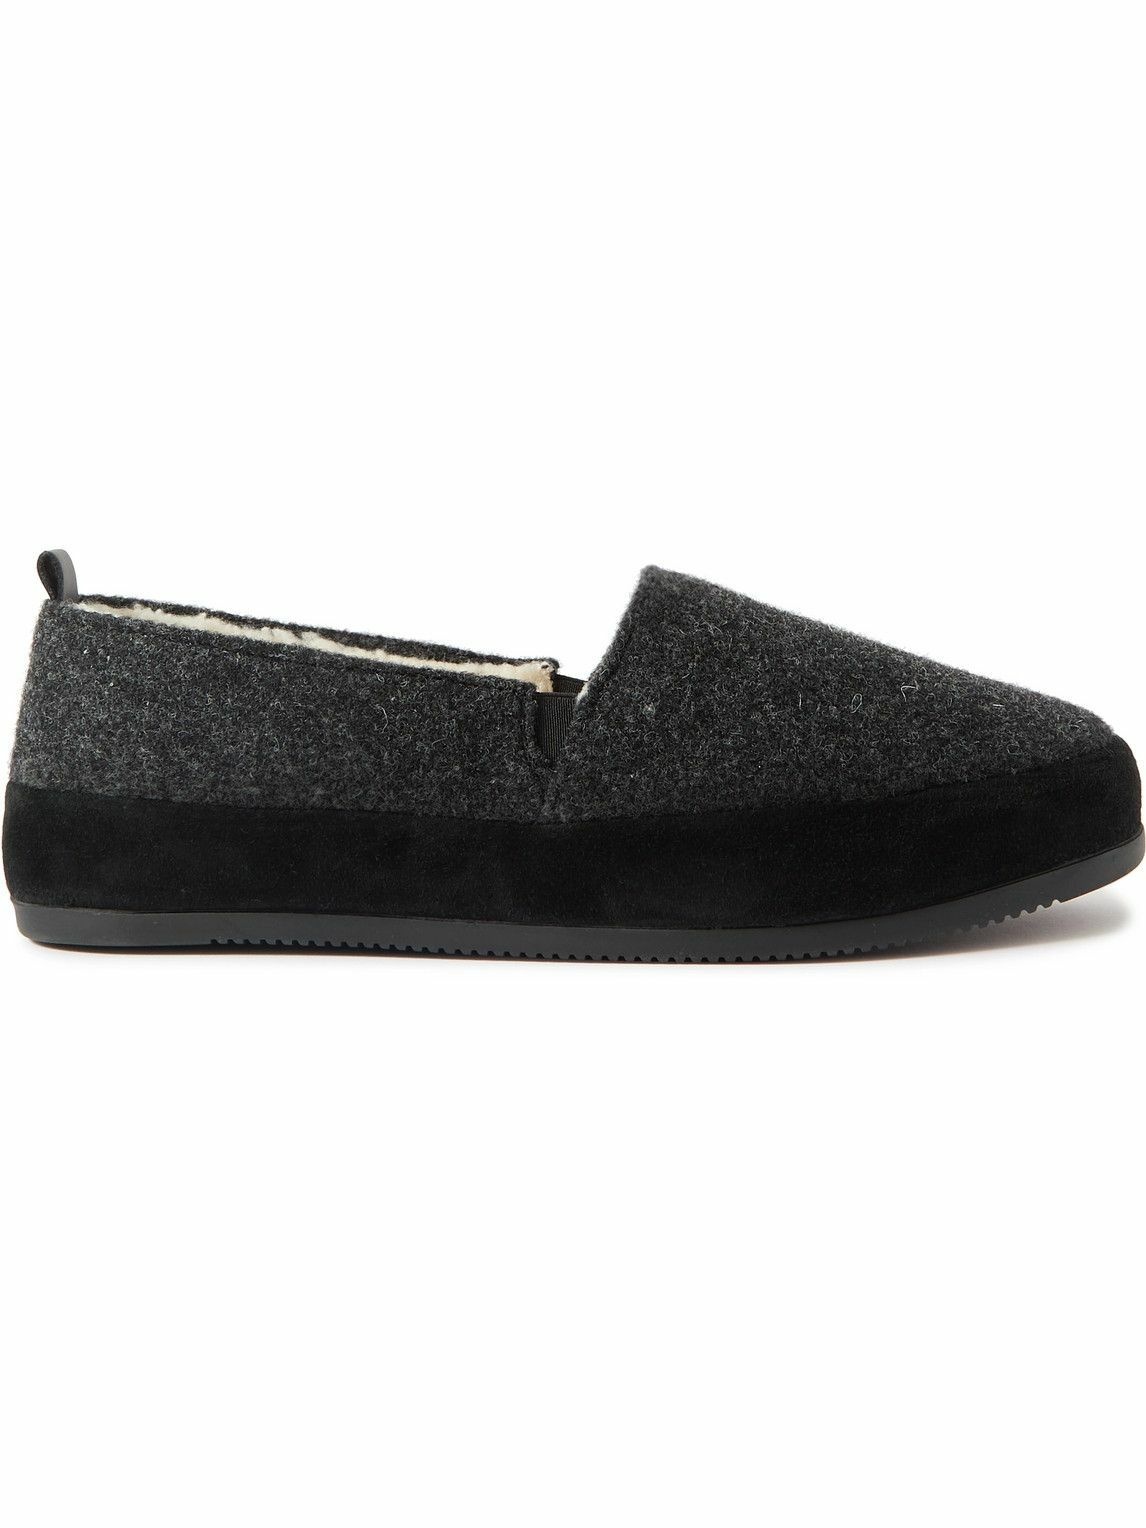 Photo: Mulo - Shearling-Lined Wool Loafers - Gray